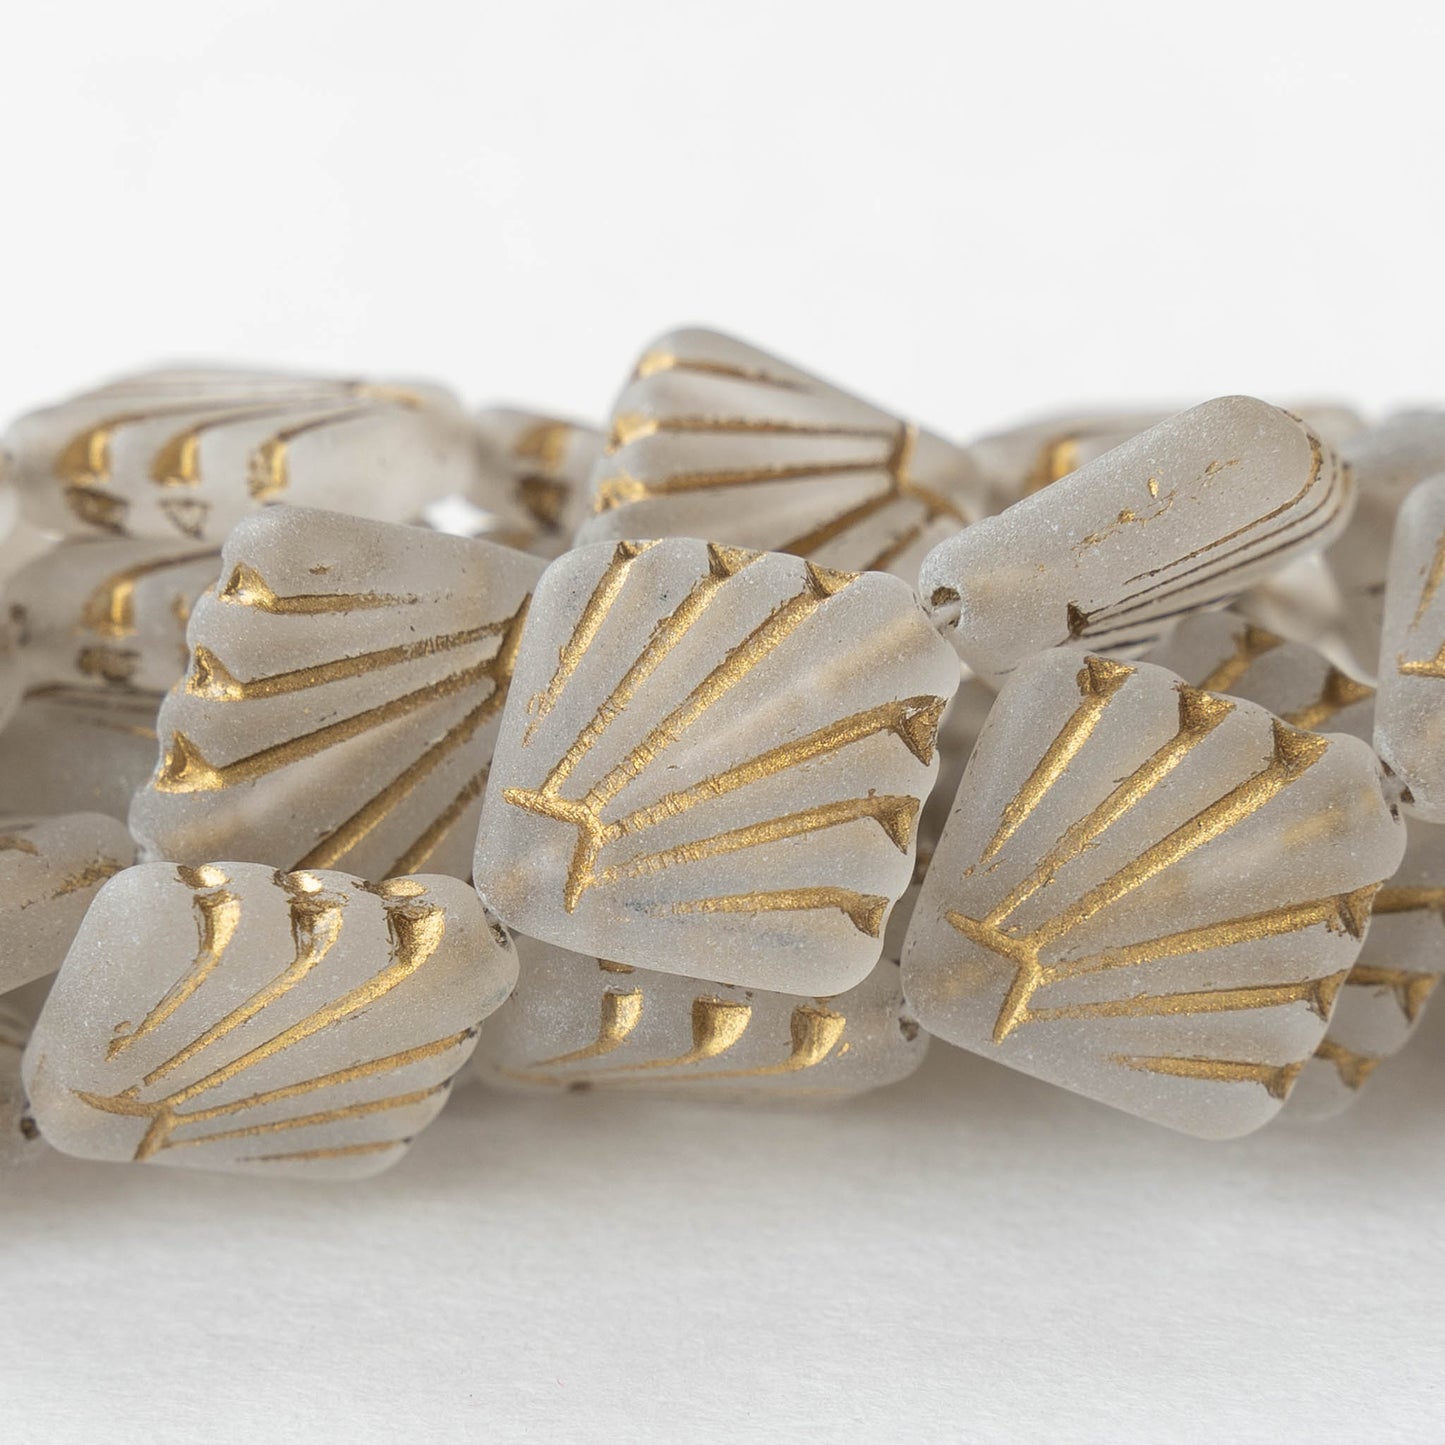 14mm Diafan Beads - Crystal Matte with Gold Wash  - 8 beads